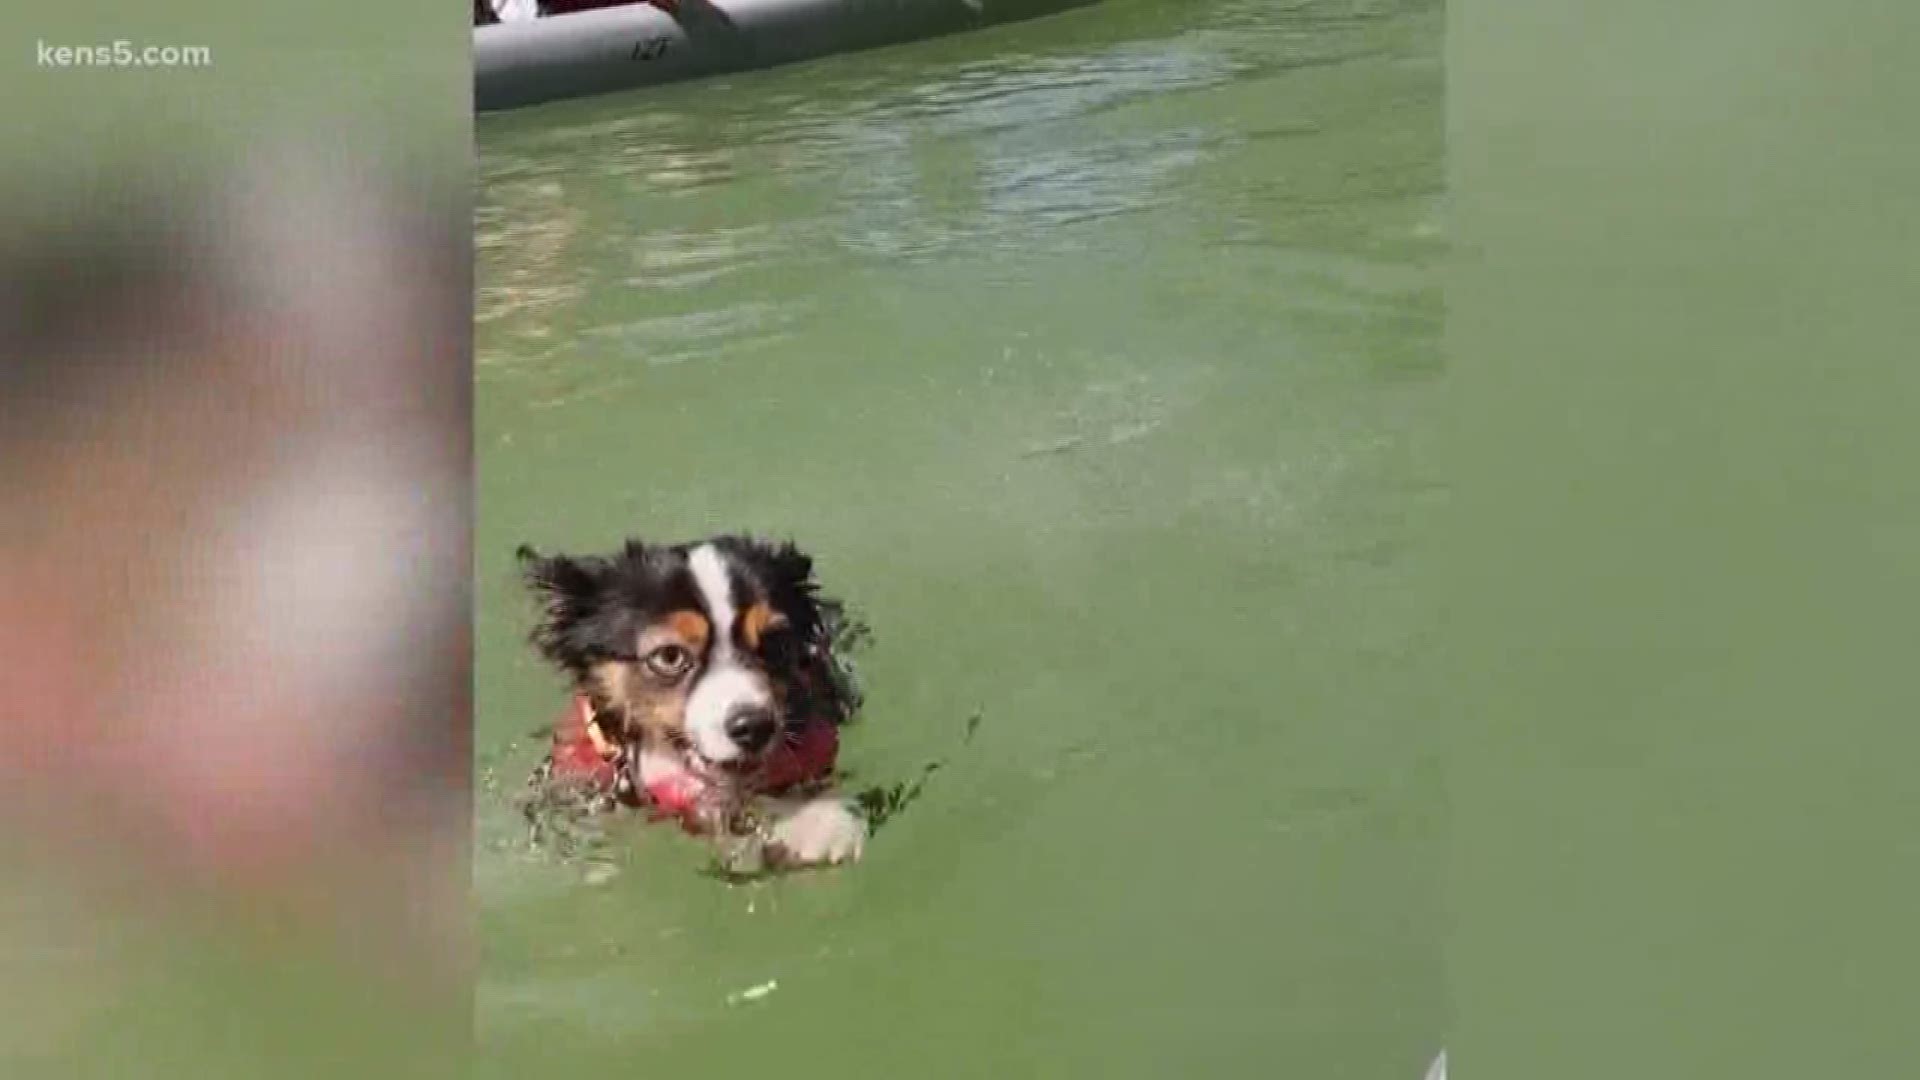 A local woman says her dog died minutes after a swim in the Guadalupe River.